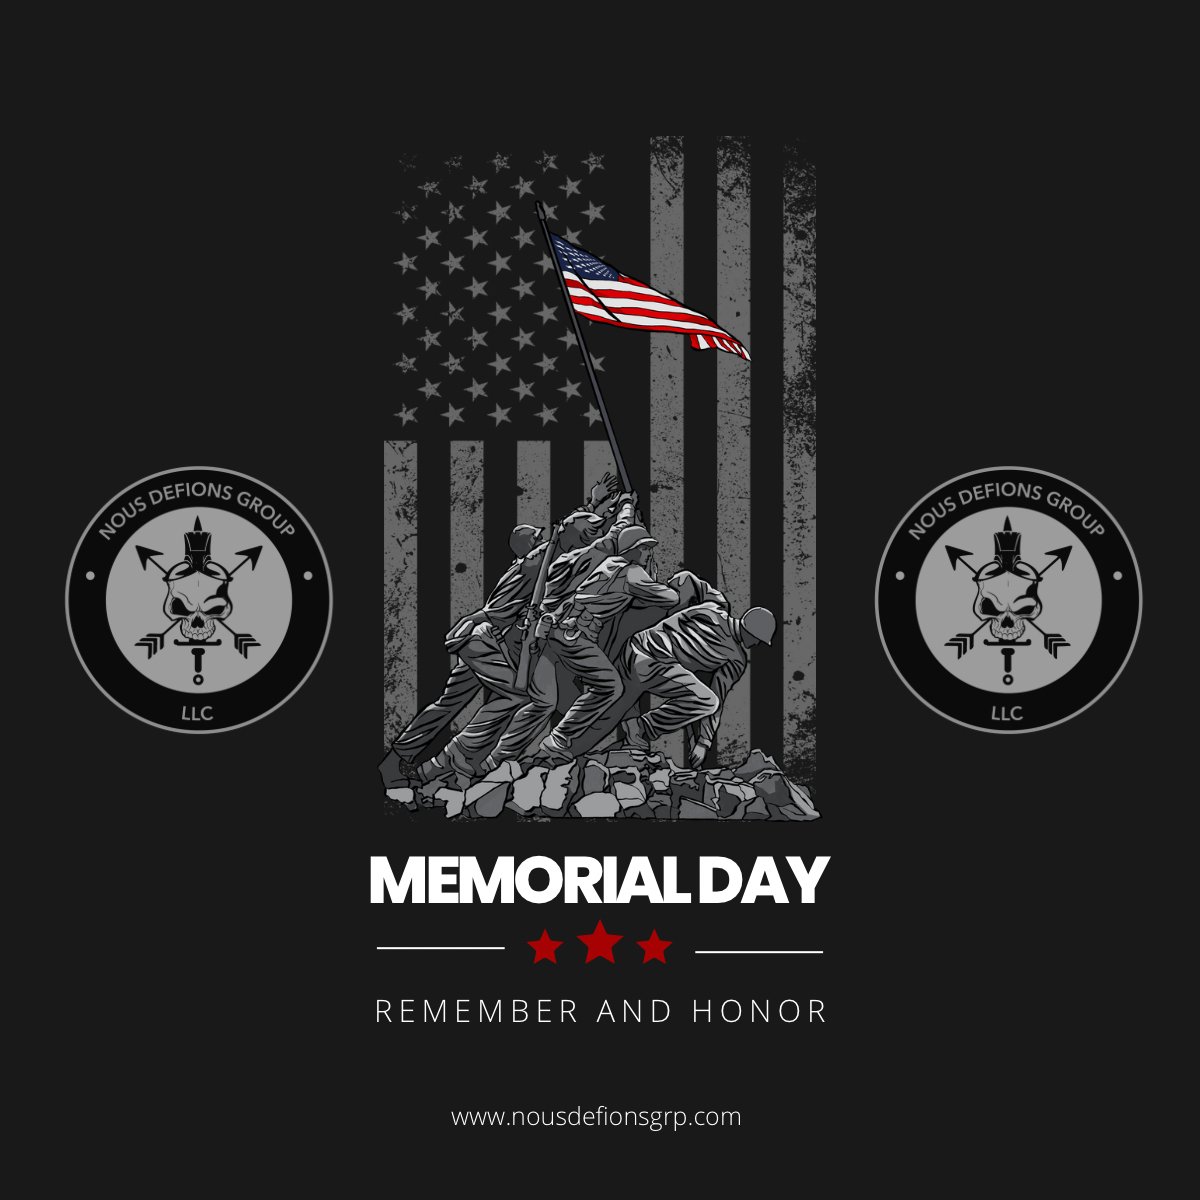 “The patriot’s blood is the seed of freedom’s tree.” 

—Thomas Campbell

#NDGLLC #FearTheSkull #SpecialForces #DeOppressoLiber #NousDefions #sof #GreenBerets #NousDefionsGrp #memorialday #honorthefallen #fayettevillenc #fortbraggnc #unitedstates